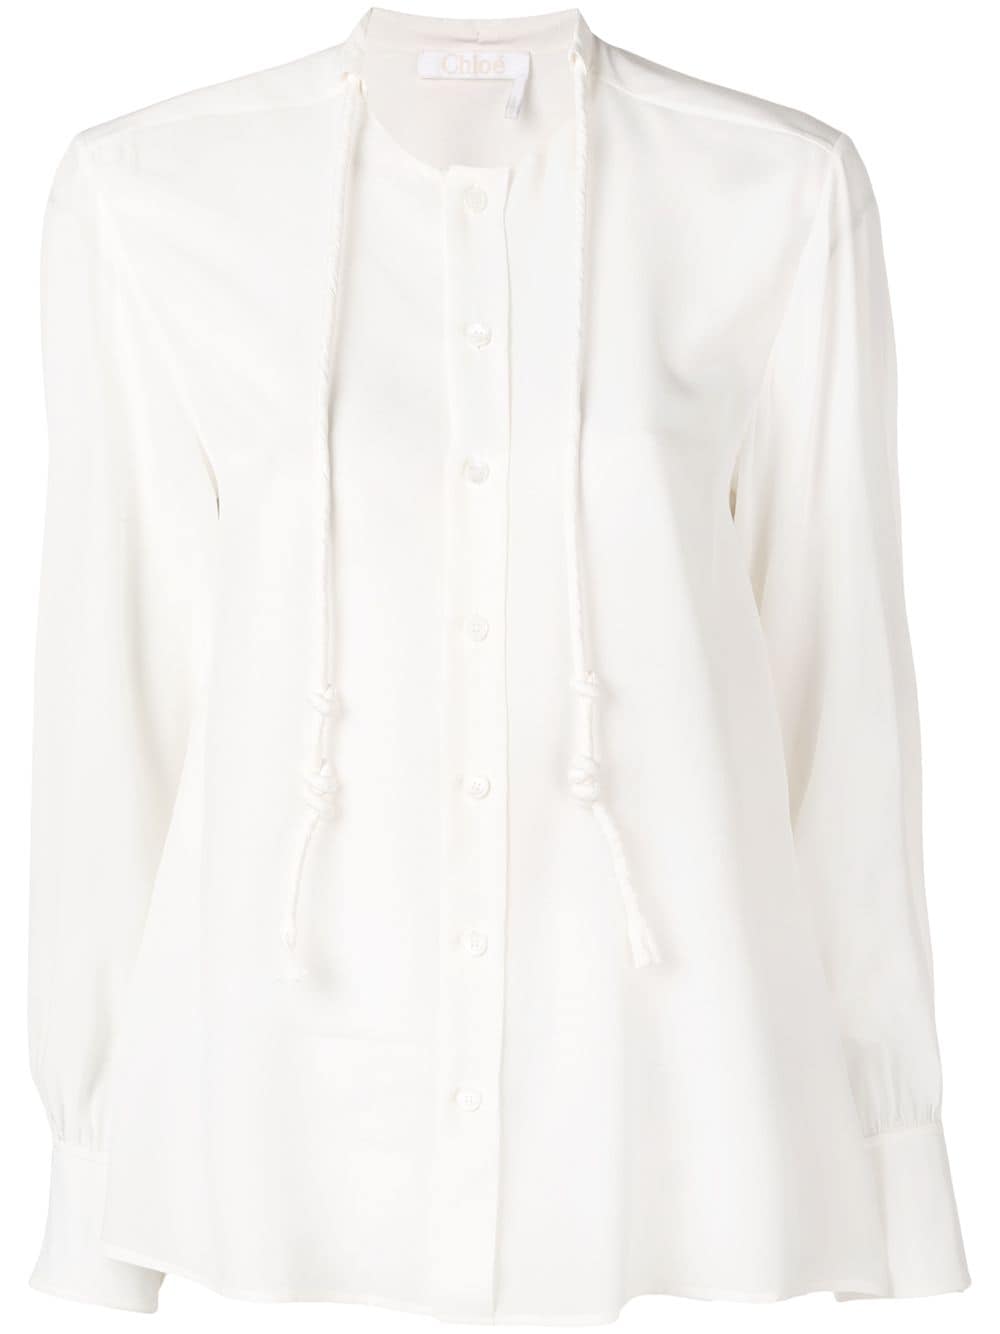 CHLOÉ Elegant Lace Blouse in Iconic Milk for SS19